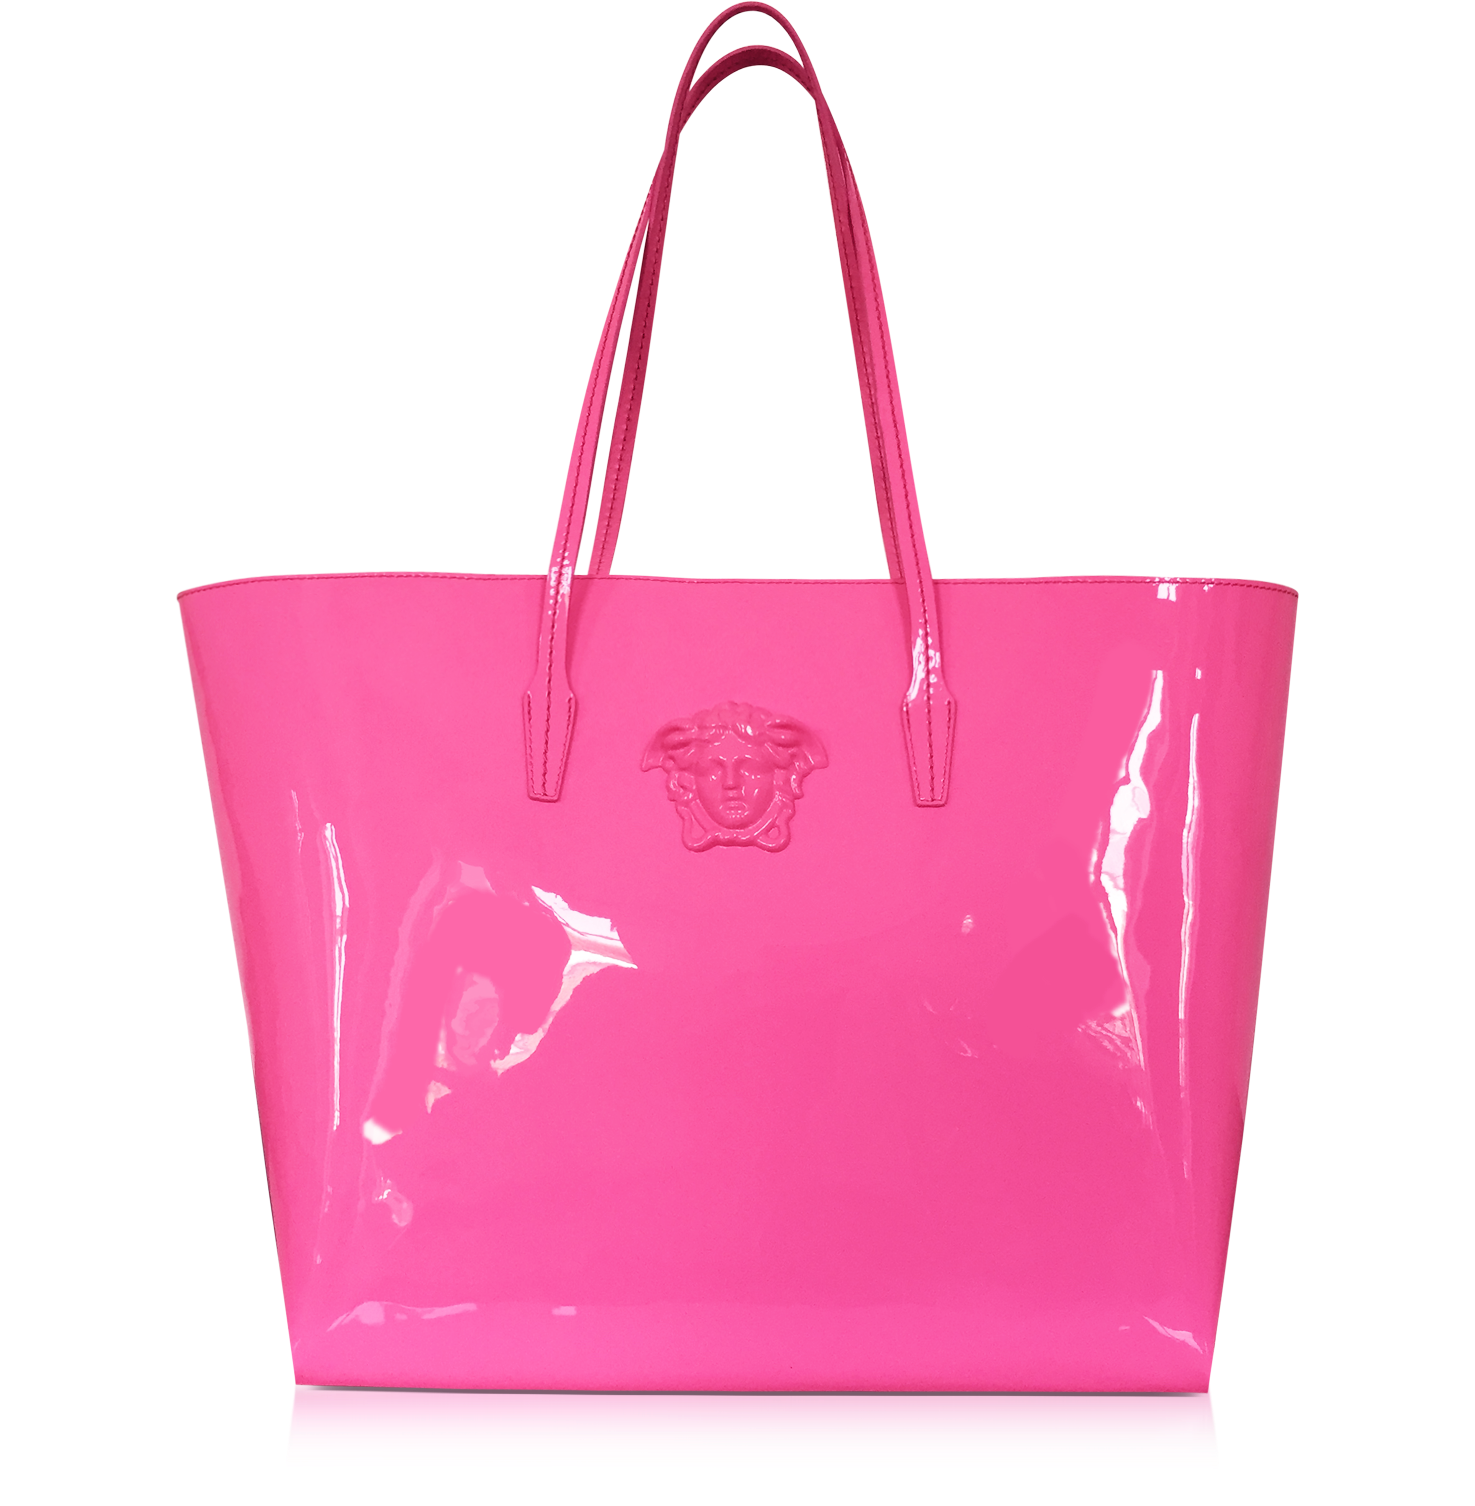 Versace Pink Patent Leather Tote Bag at FORZIERI